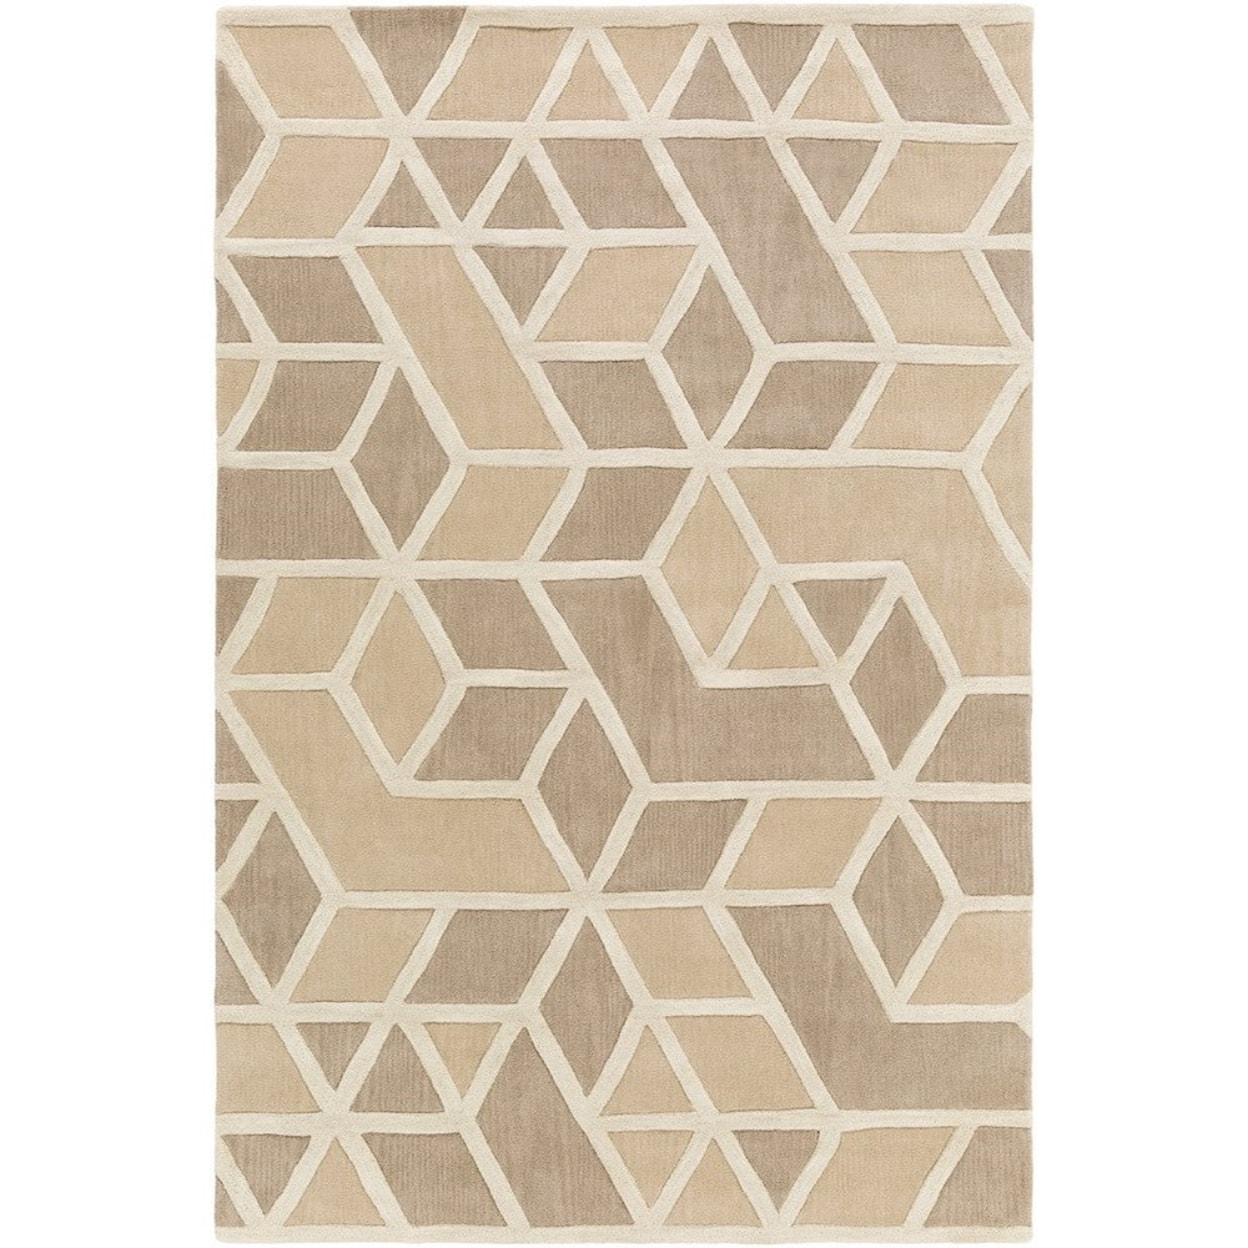 Ruby-Gordon Accents Oasis 5' x 8' Rug